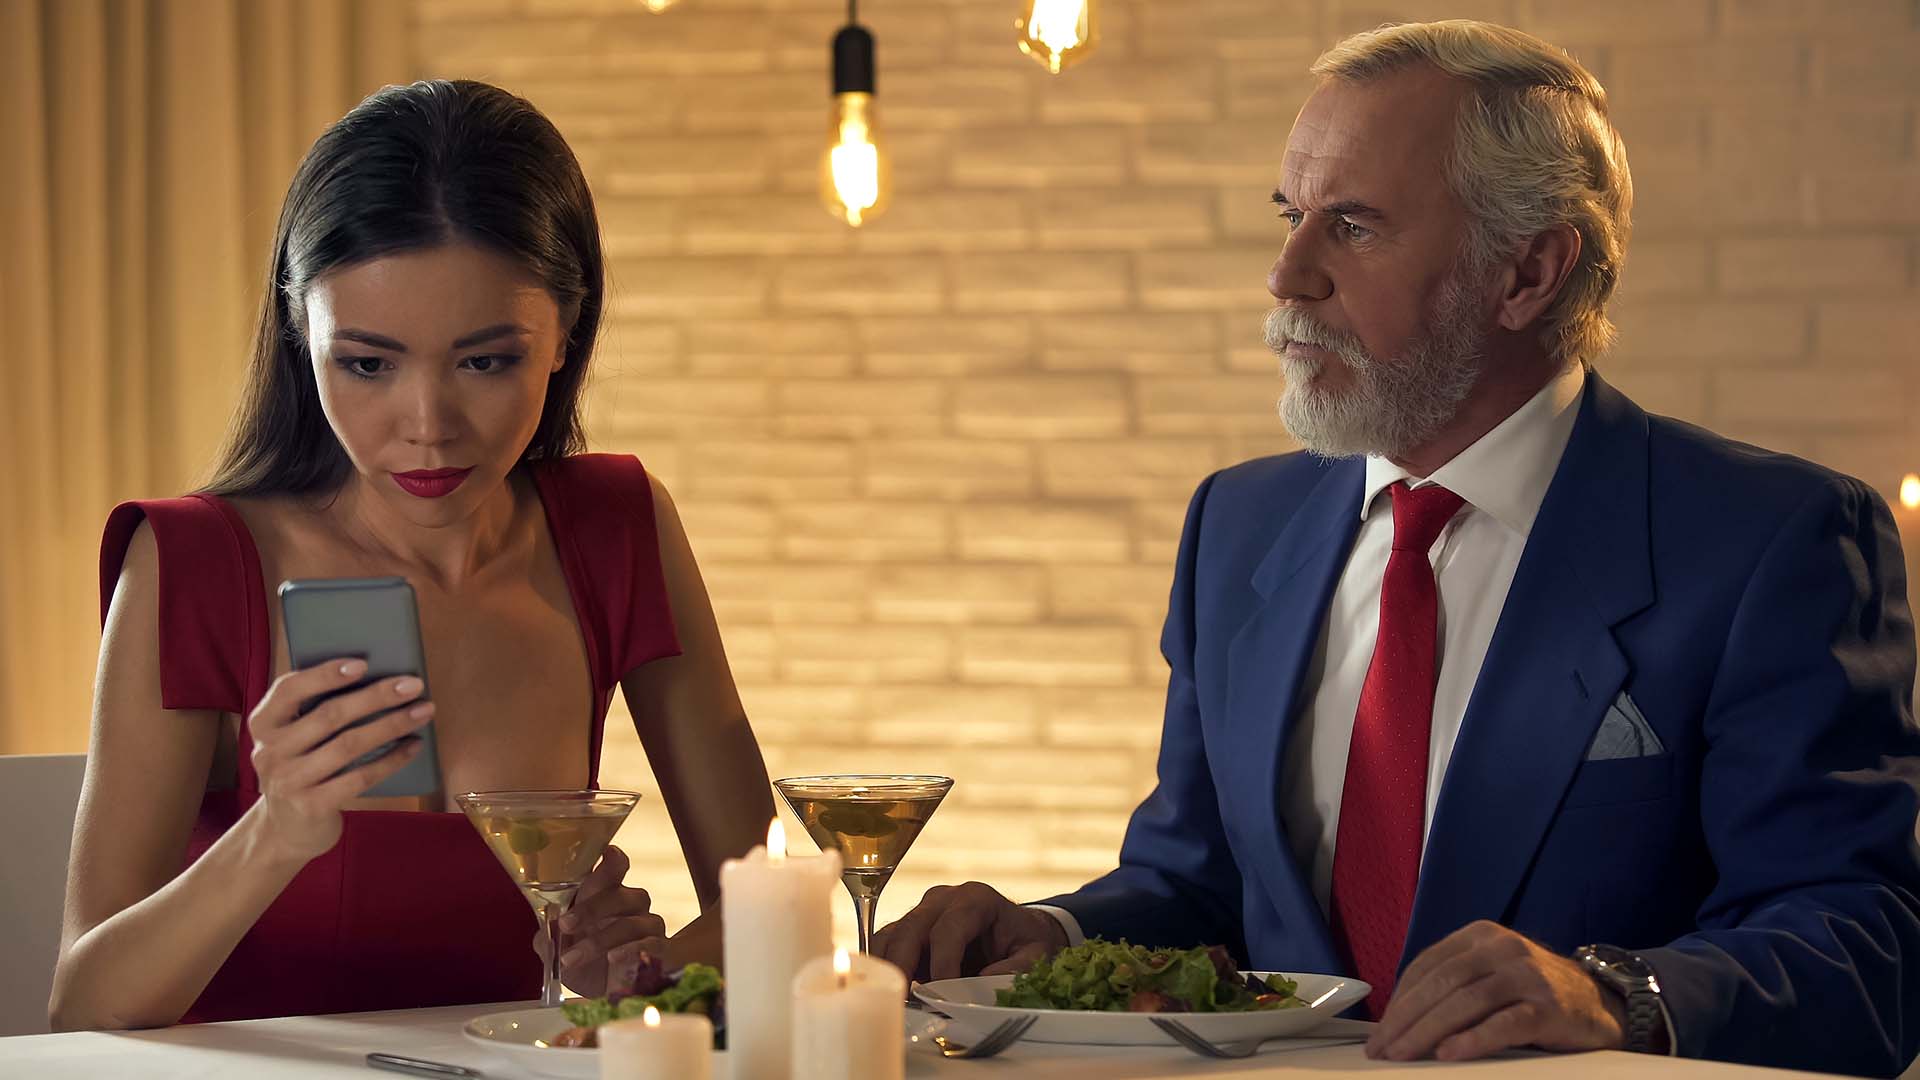 Older man in blue suit and younger woman in red dress having dinner. The woman is looking intensely at her phone